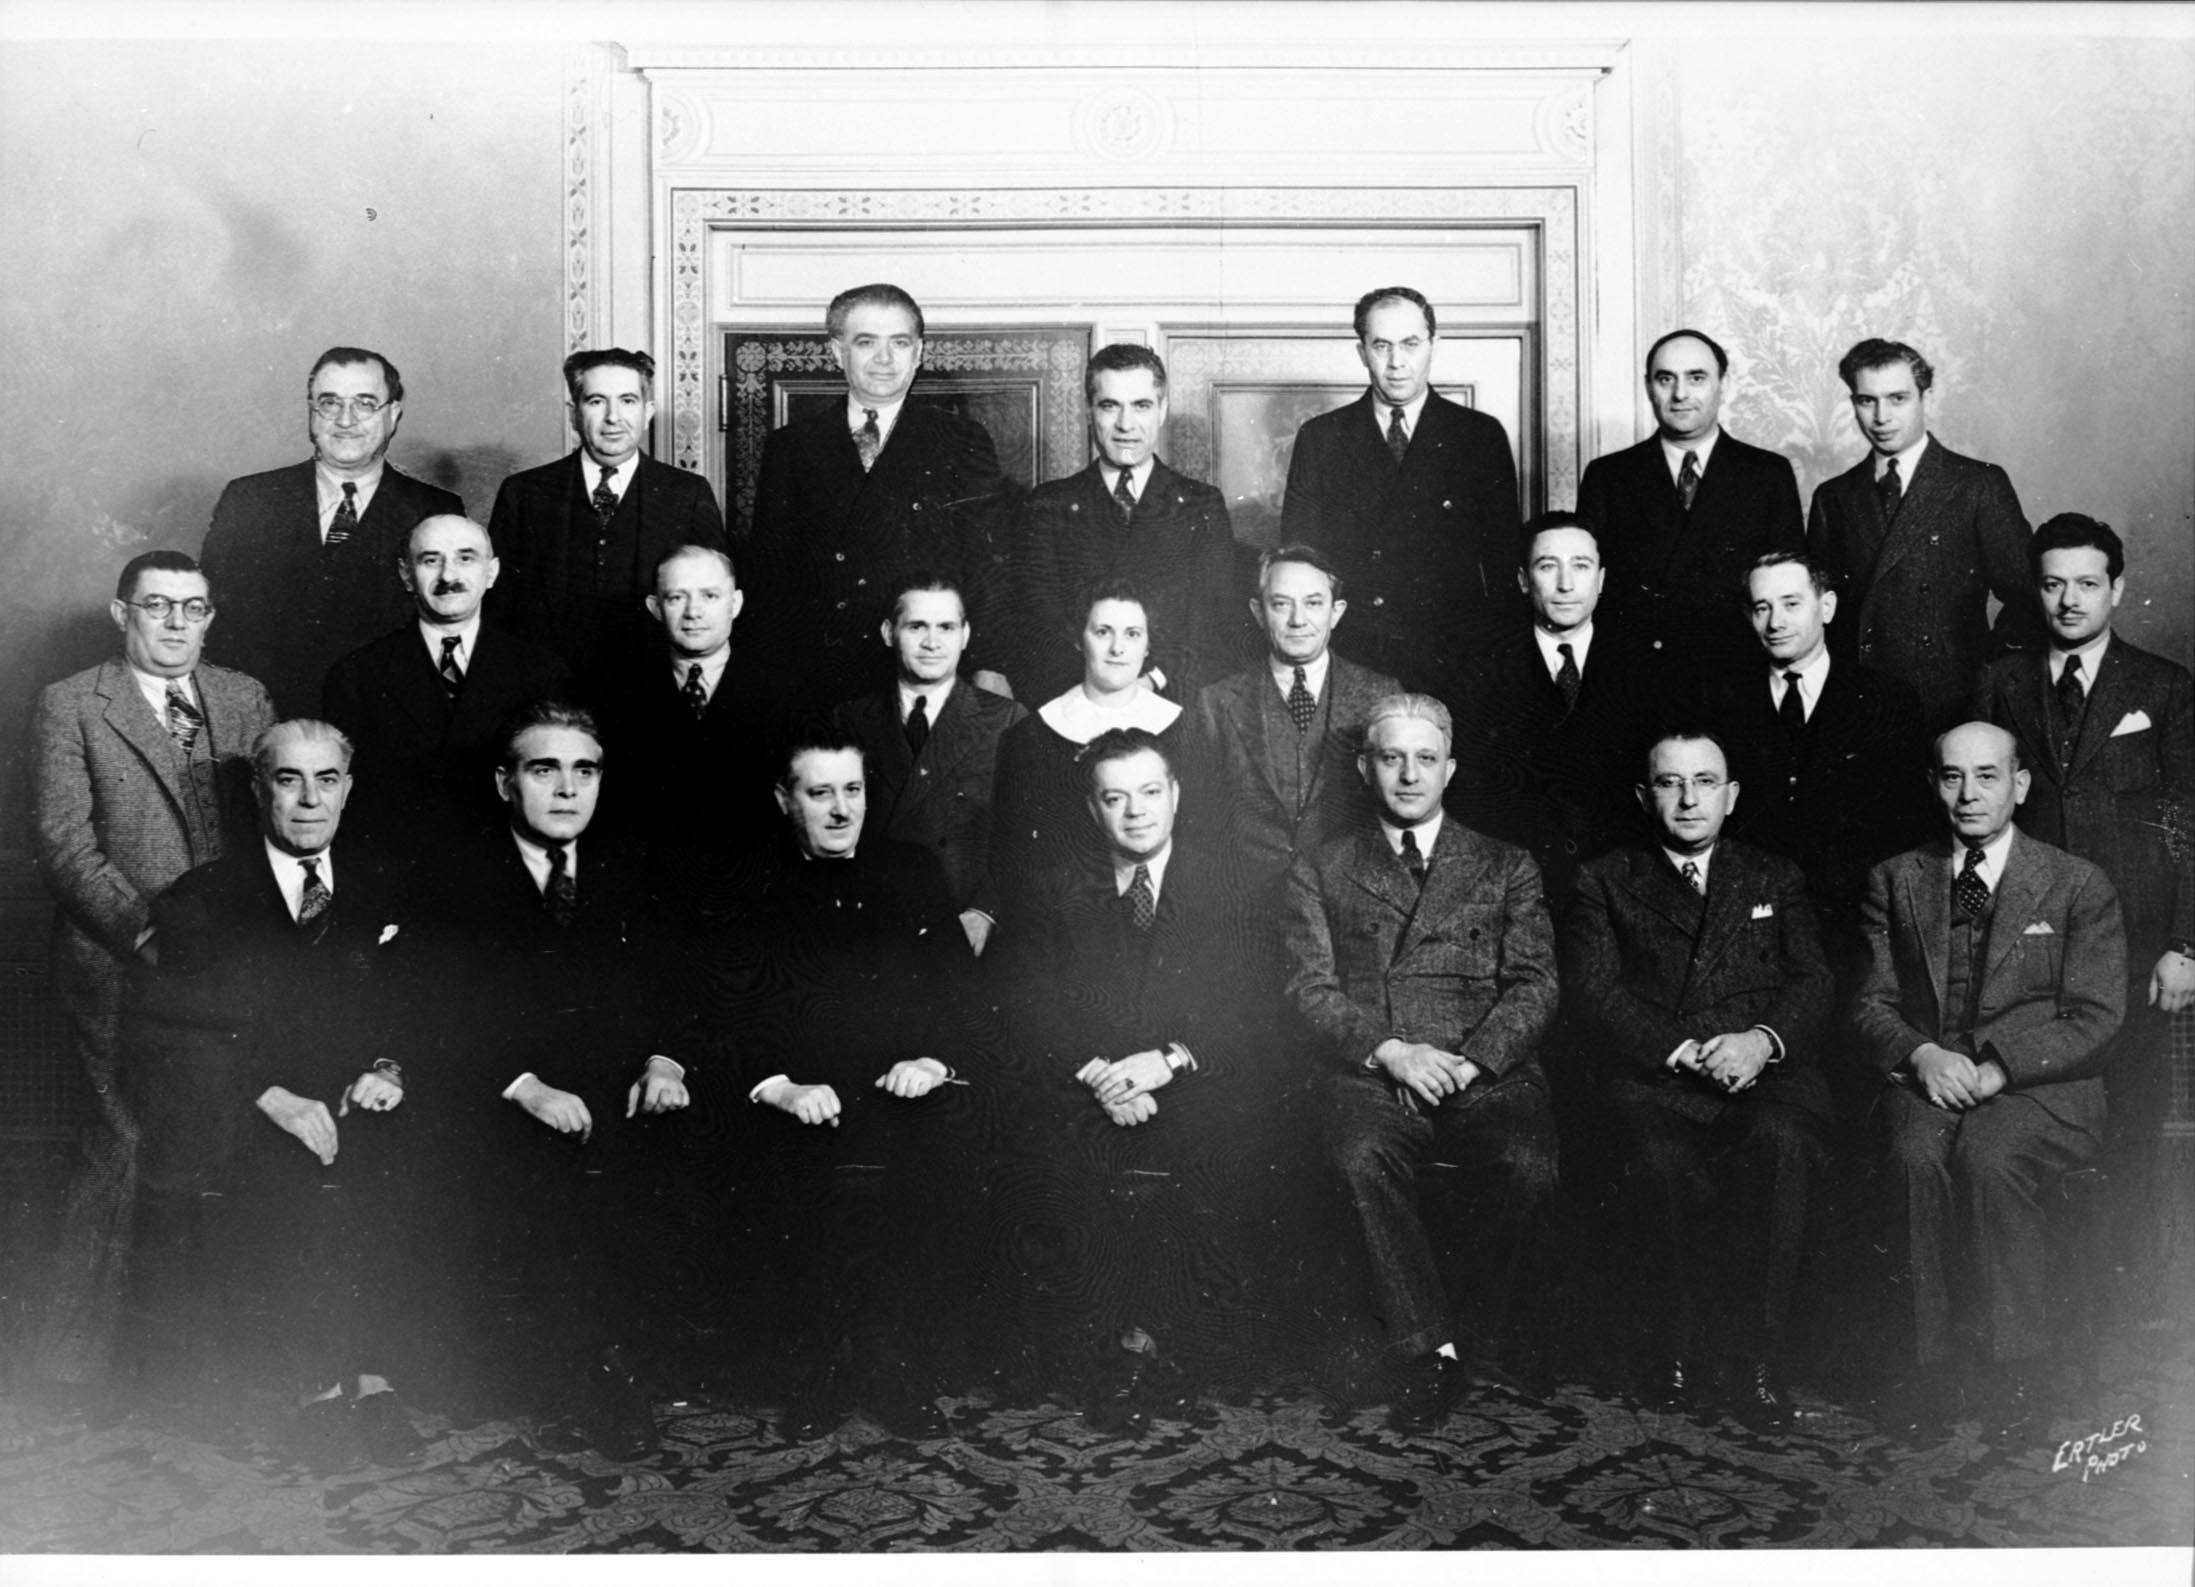 a group of people are wearing suits and ties